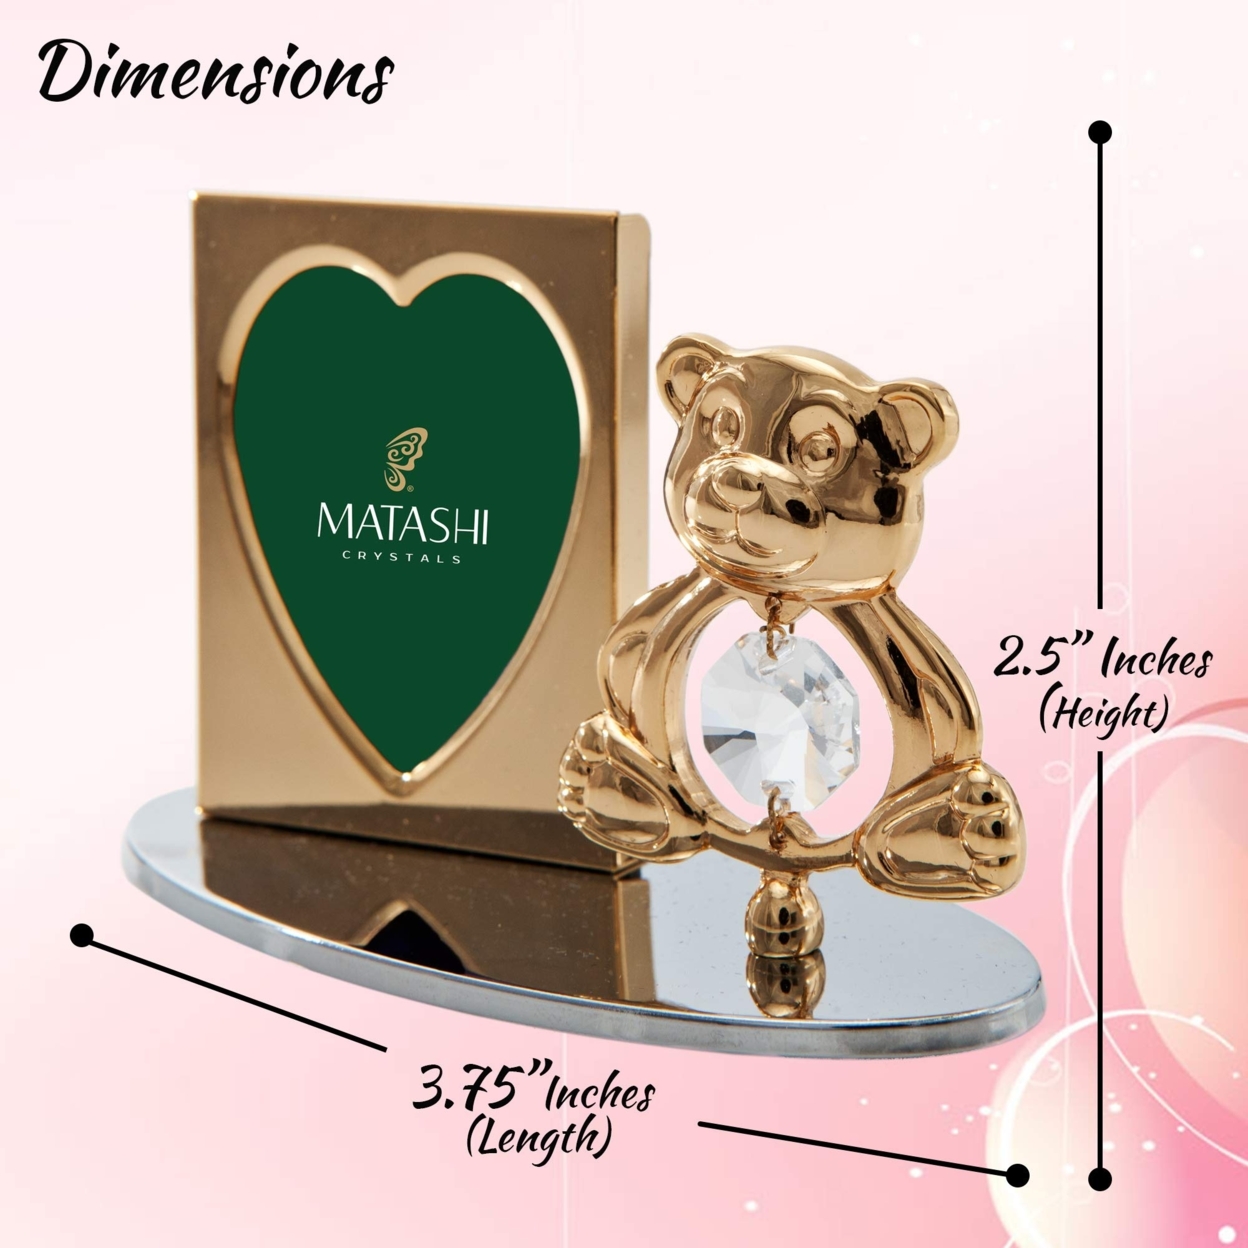 Matashi 24k Gold Plated Picture Frame Desk Set With Crystal Decorated Teddy Bear Figurine On A Silver Base Gift For Christmas Mother's Day